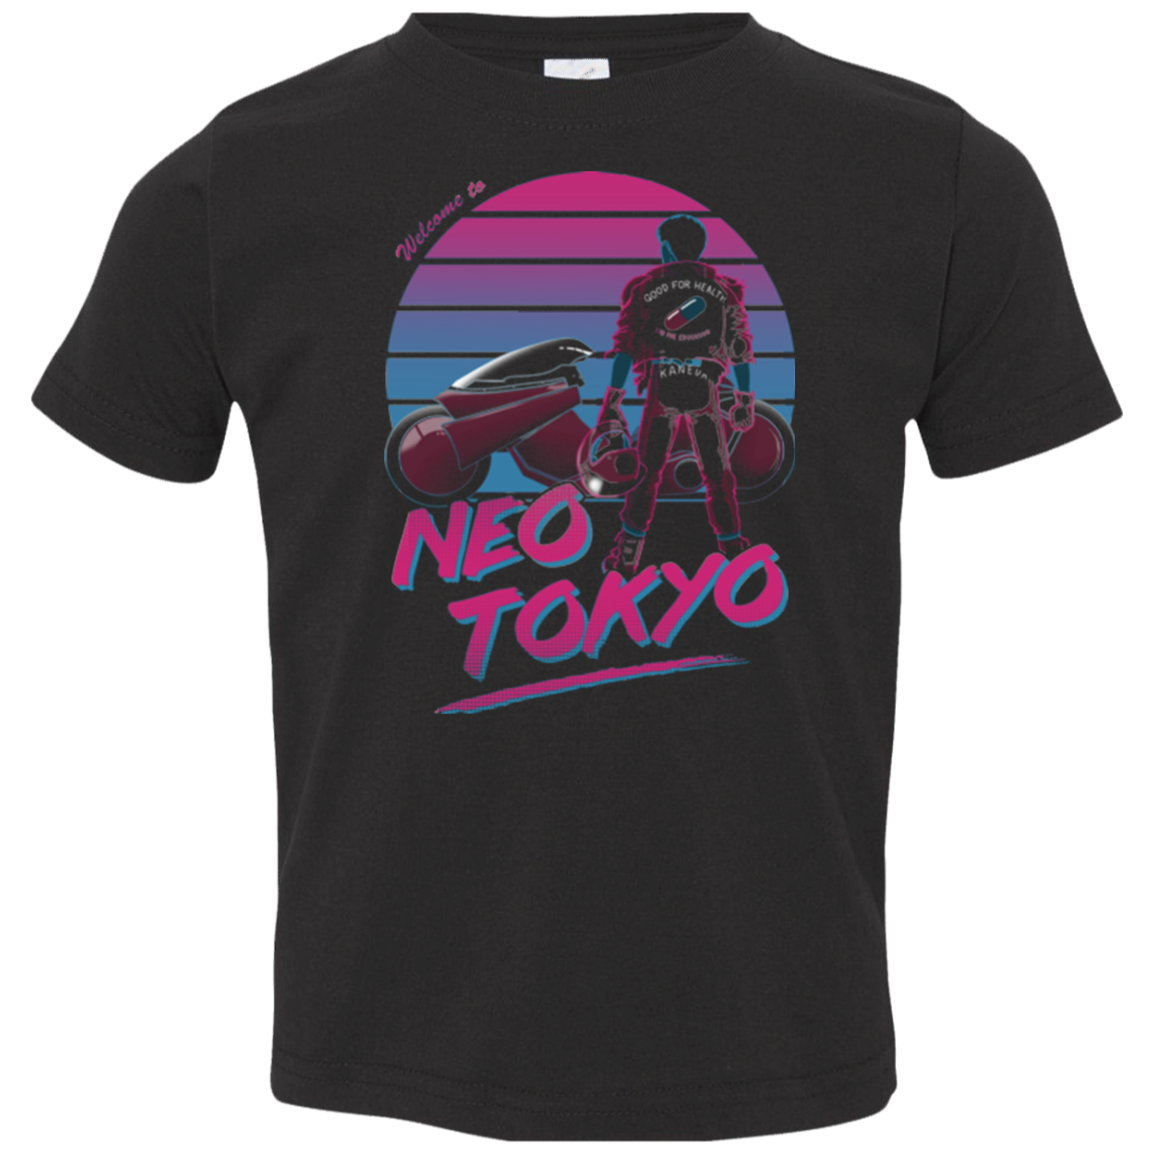 Welcome to Neo Tokyo Toddler Premium T-Shirt